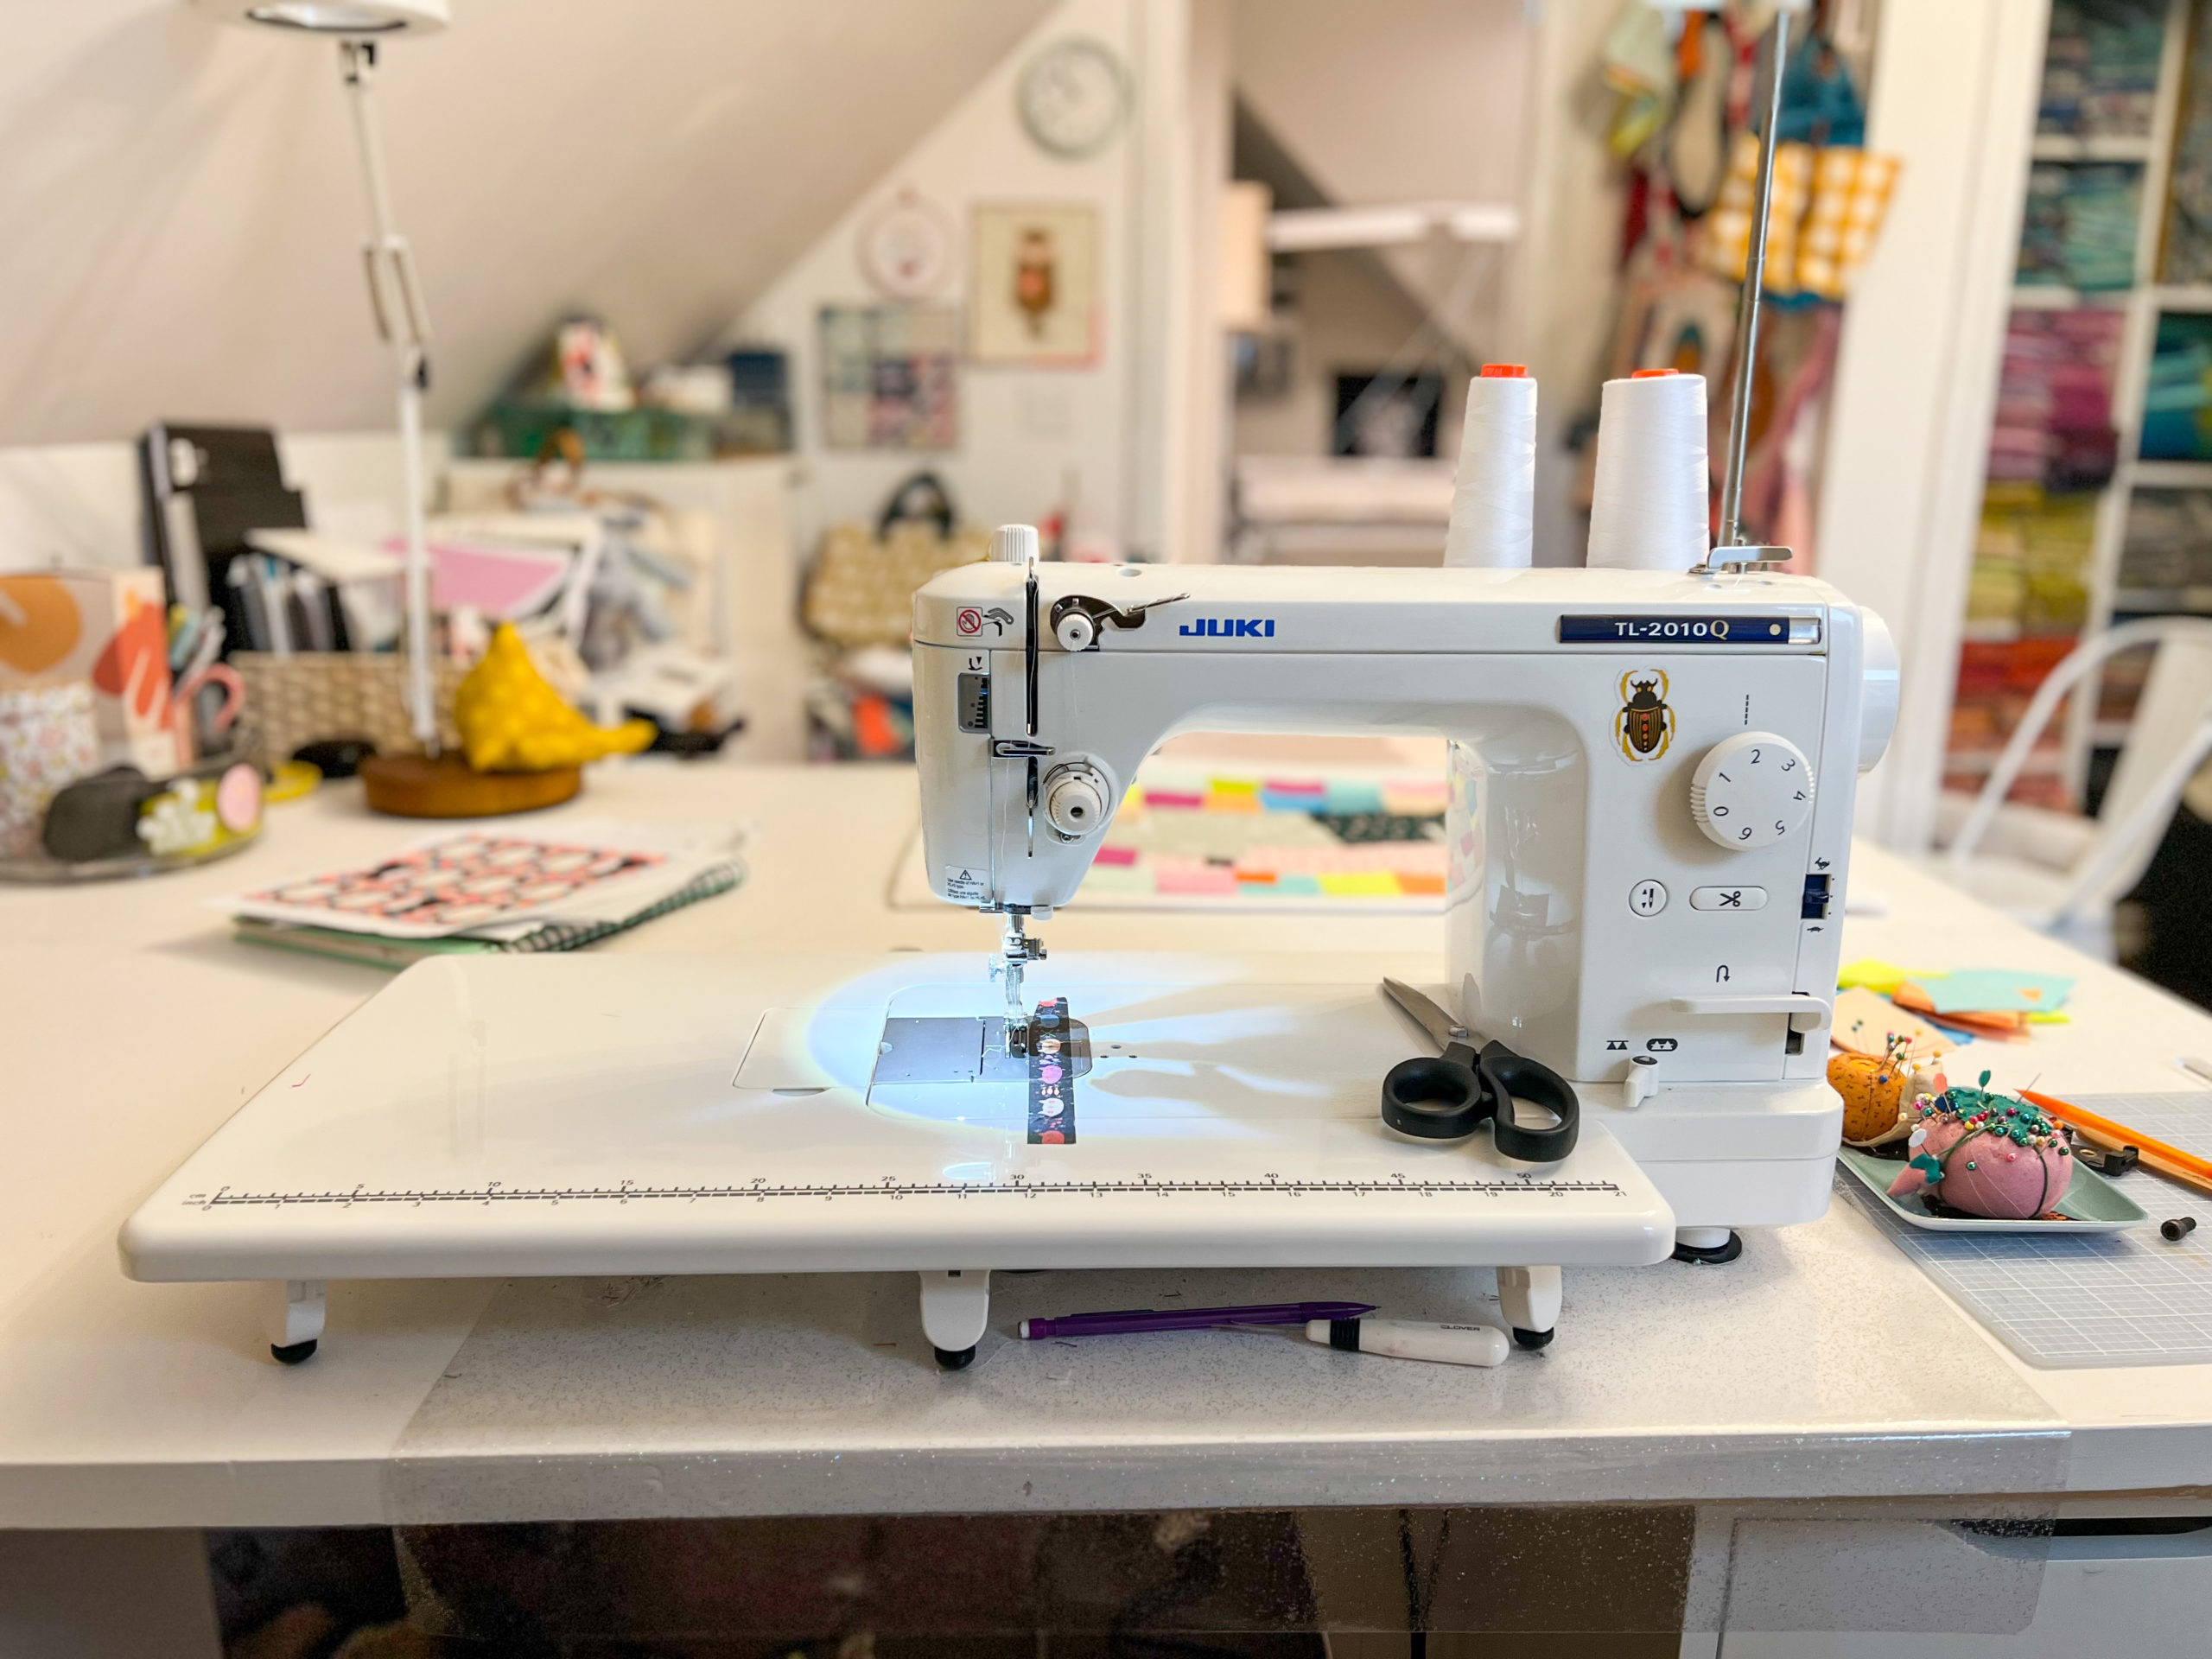 Best Computerized Sewing Machine Reviews of 2019 - Fun & Easy to Use